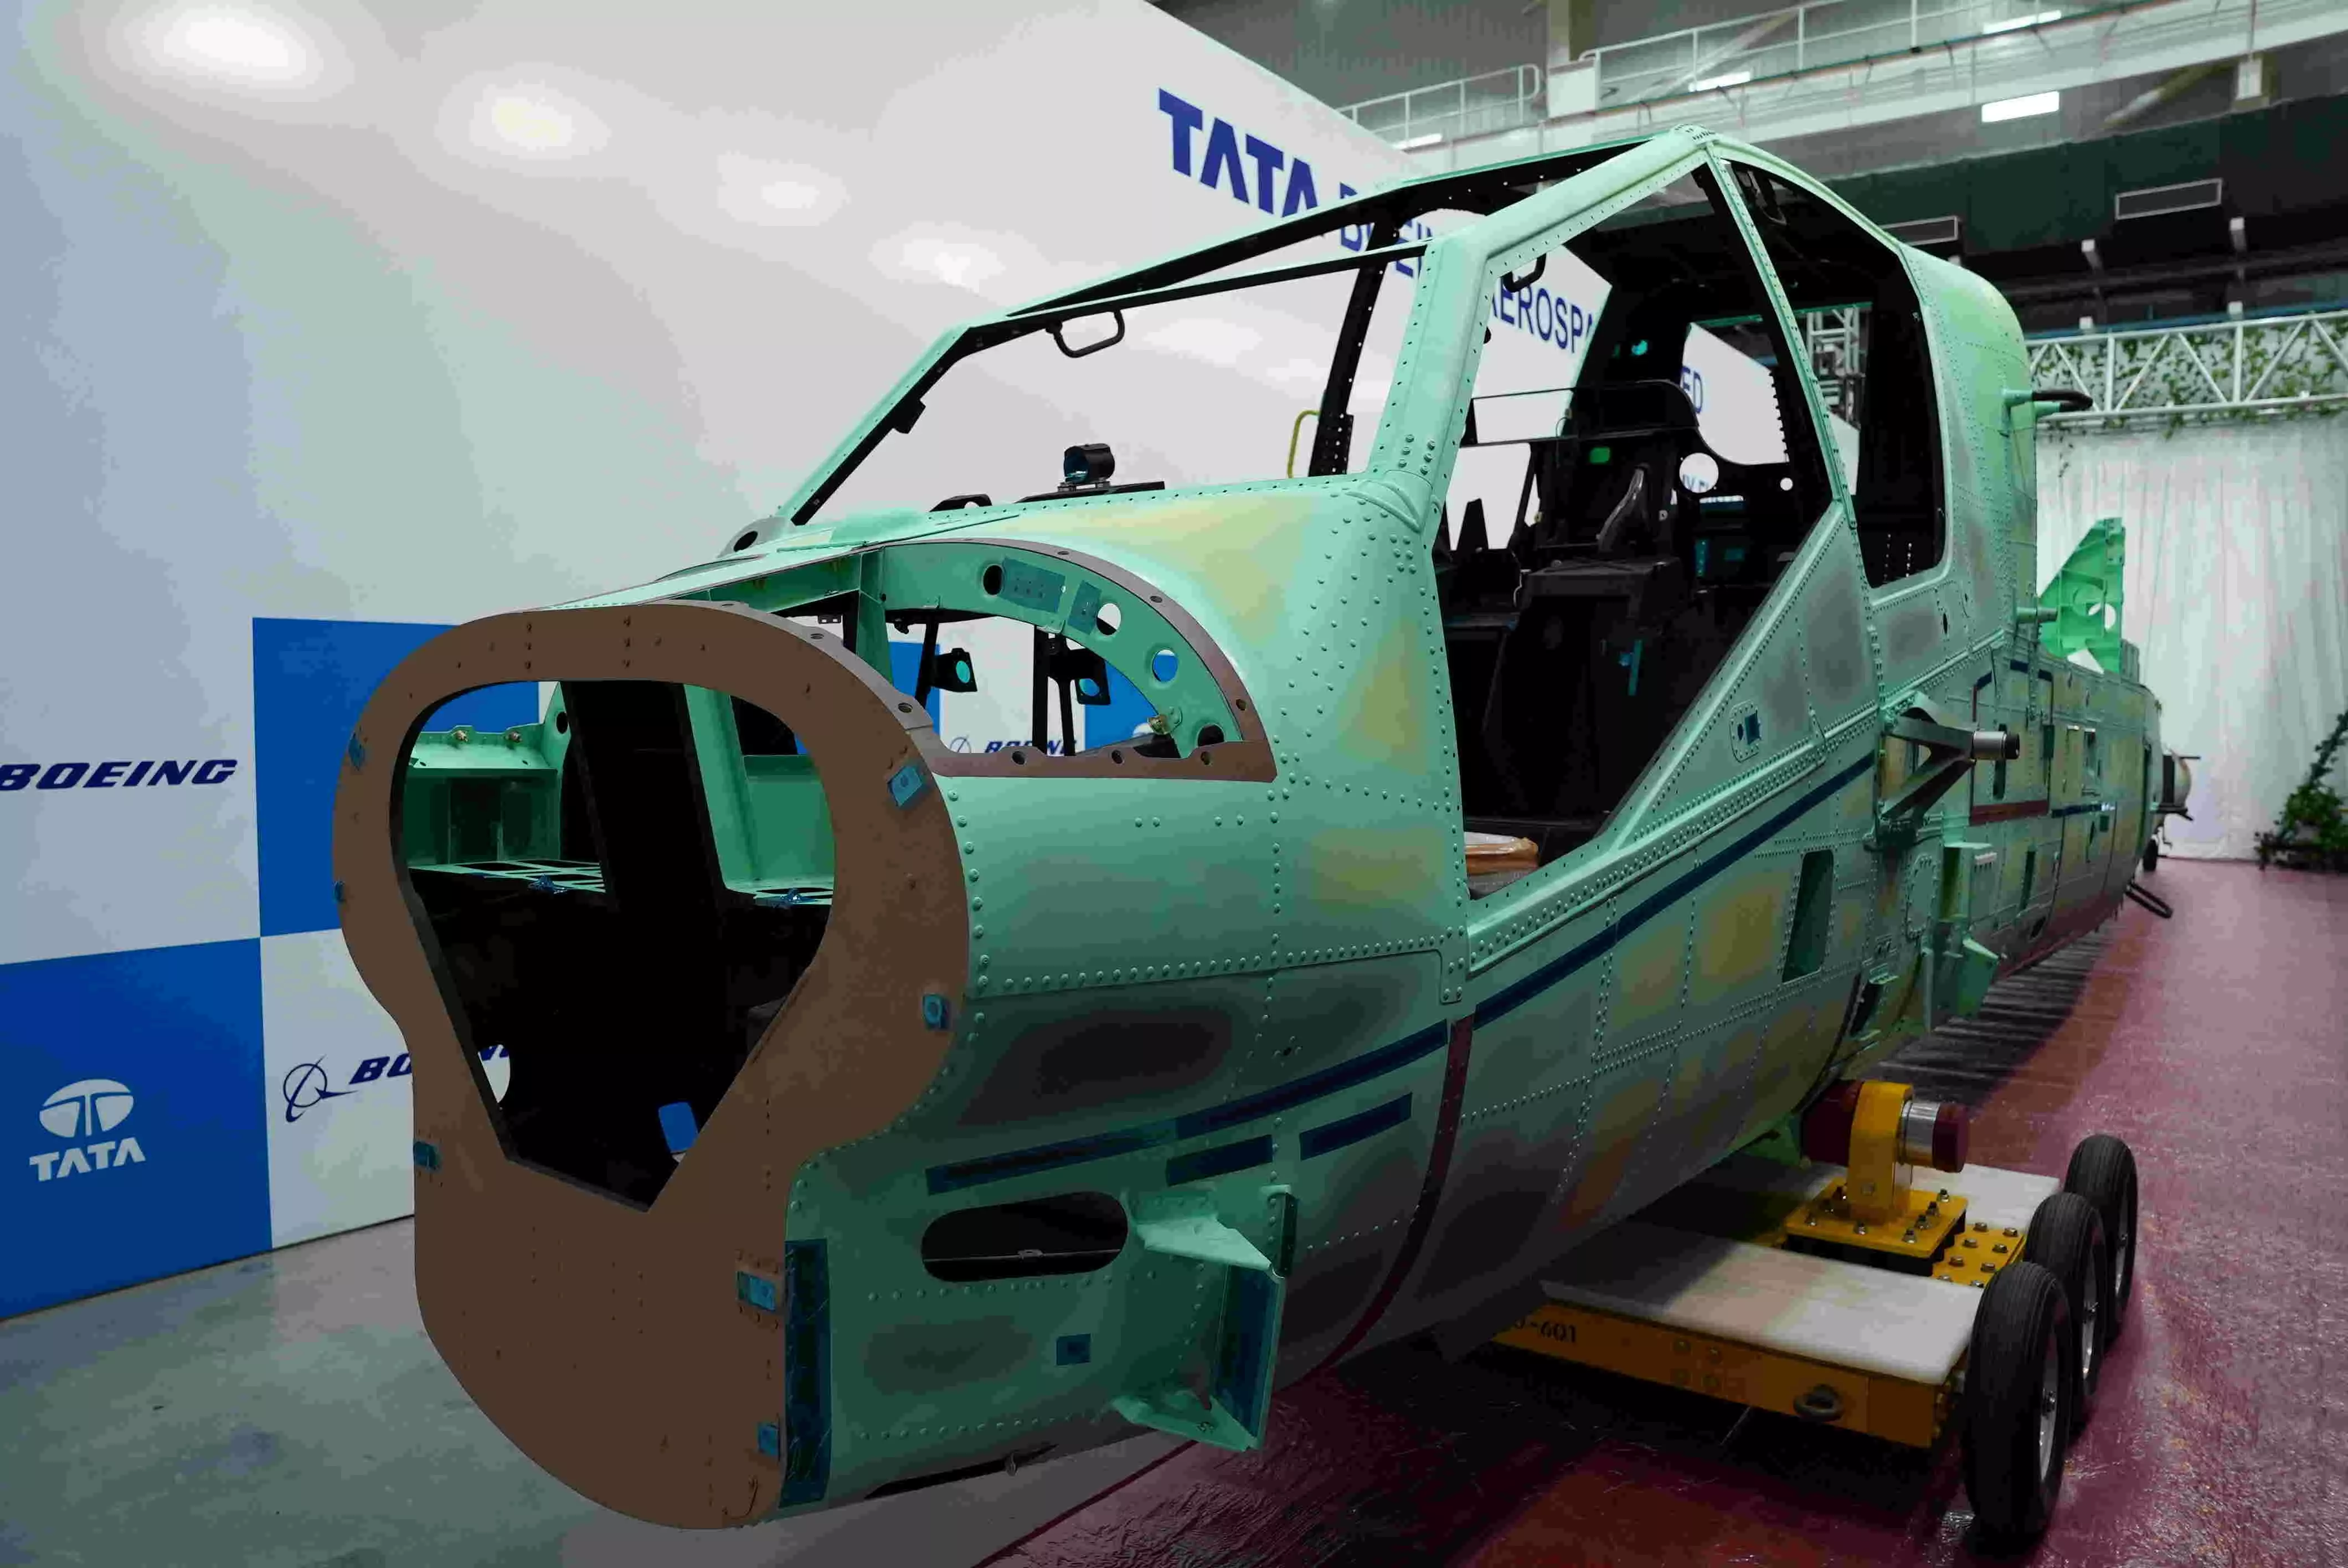 Tata Boeing Aerospace Delivers 250 AH-64 Apache Fuselages, manufactured in India